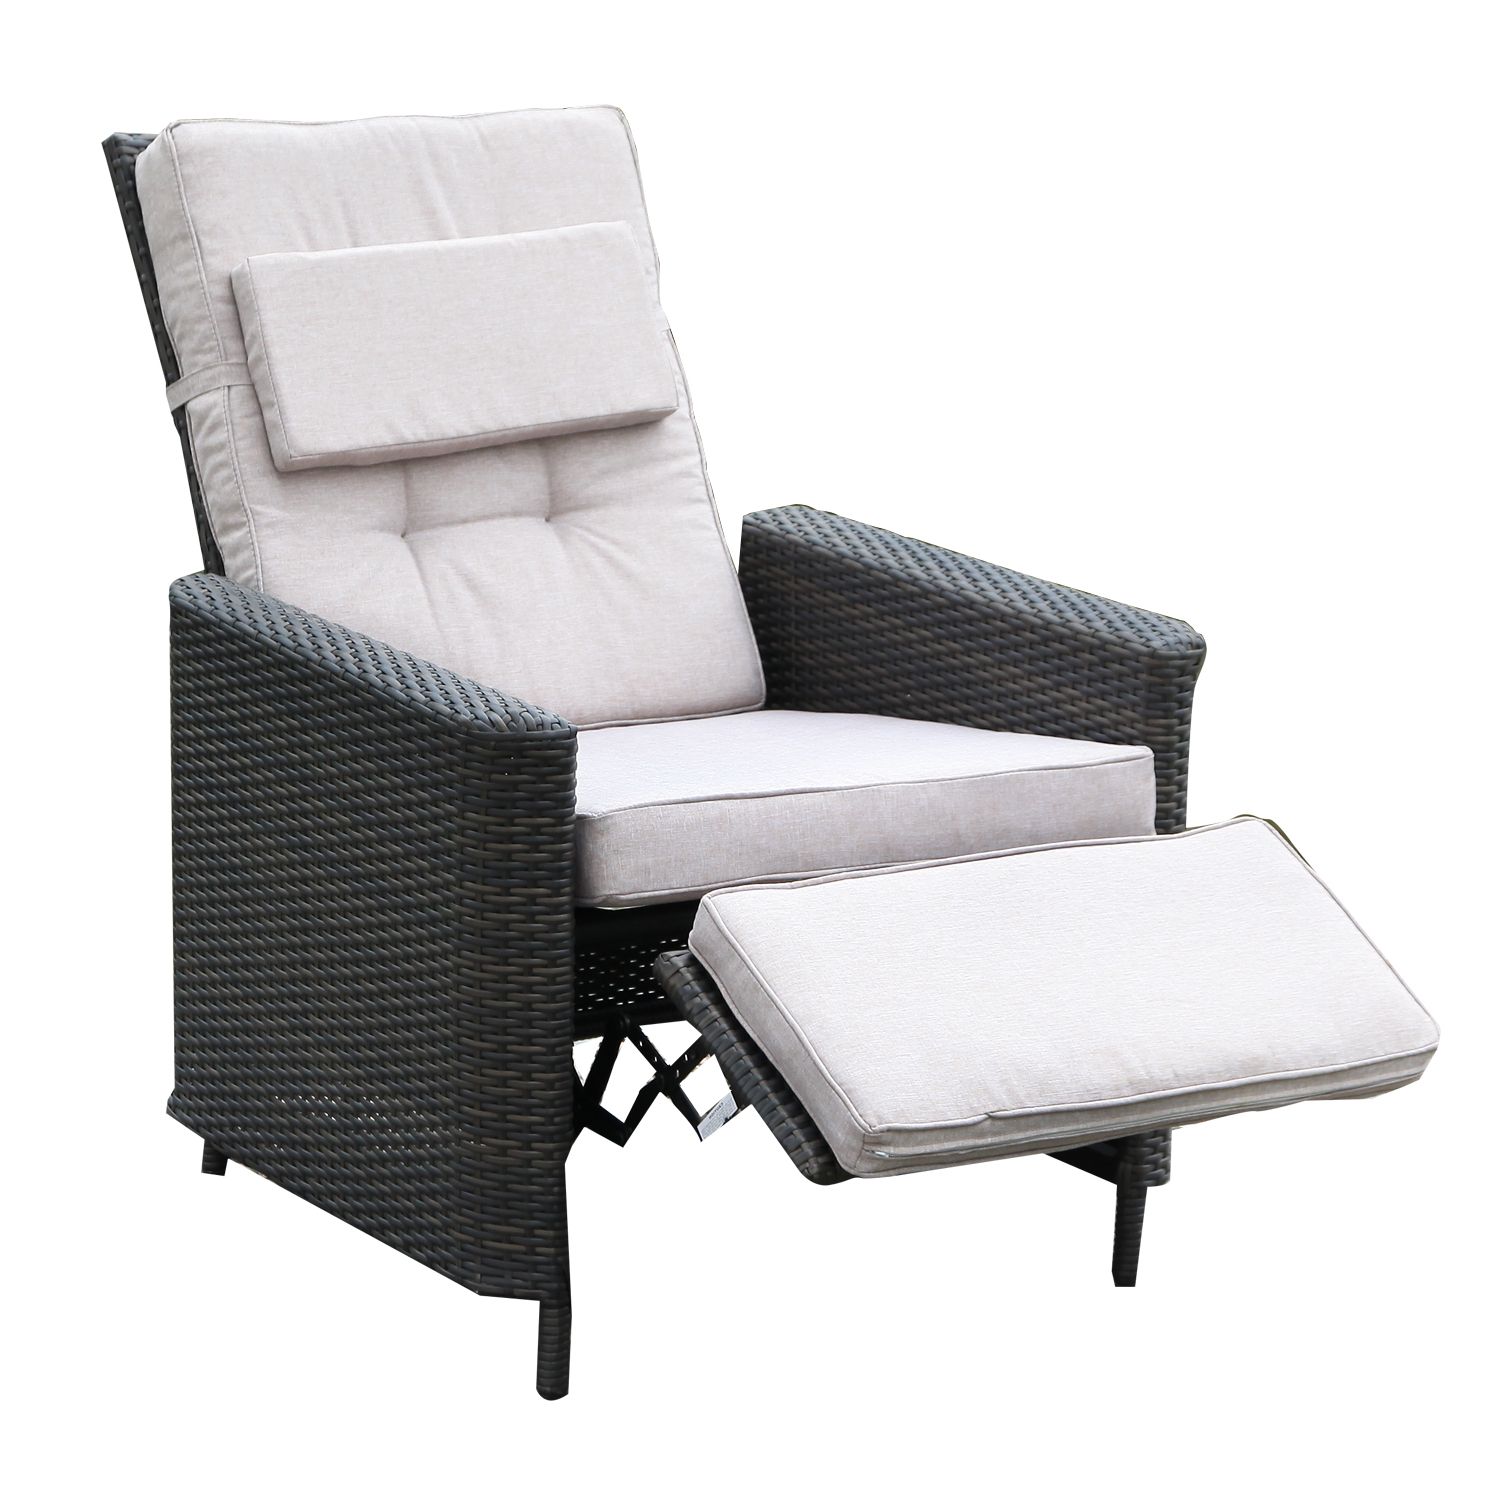 Newest Outdoor Adjustable Rattan Wicker Recliner Chairs With Cushion Throughout 45 Outdoor Reclining Chairs With Cushions, Comfortable (View 7 of 25)